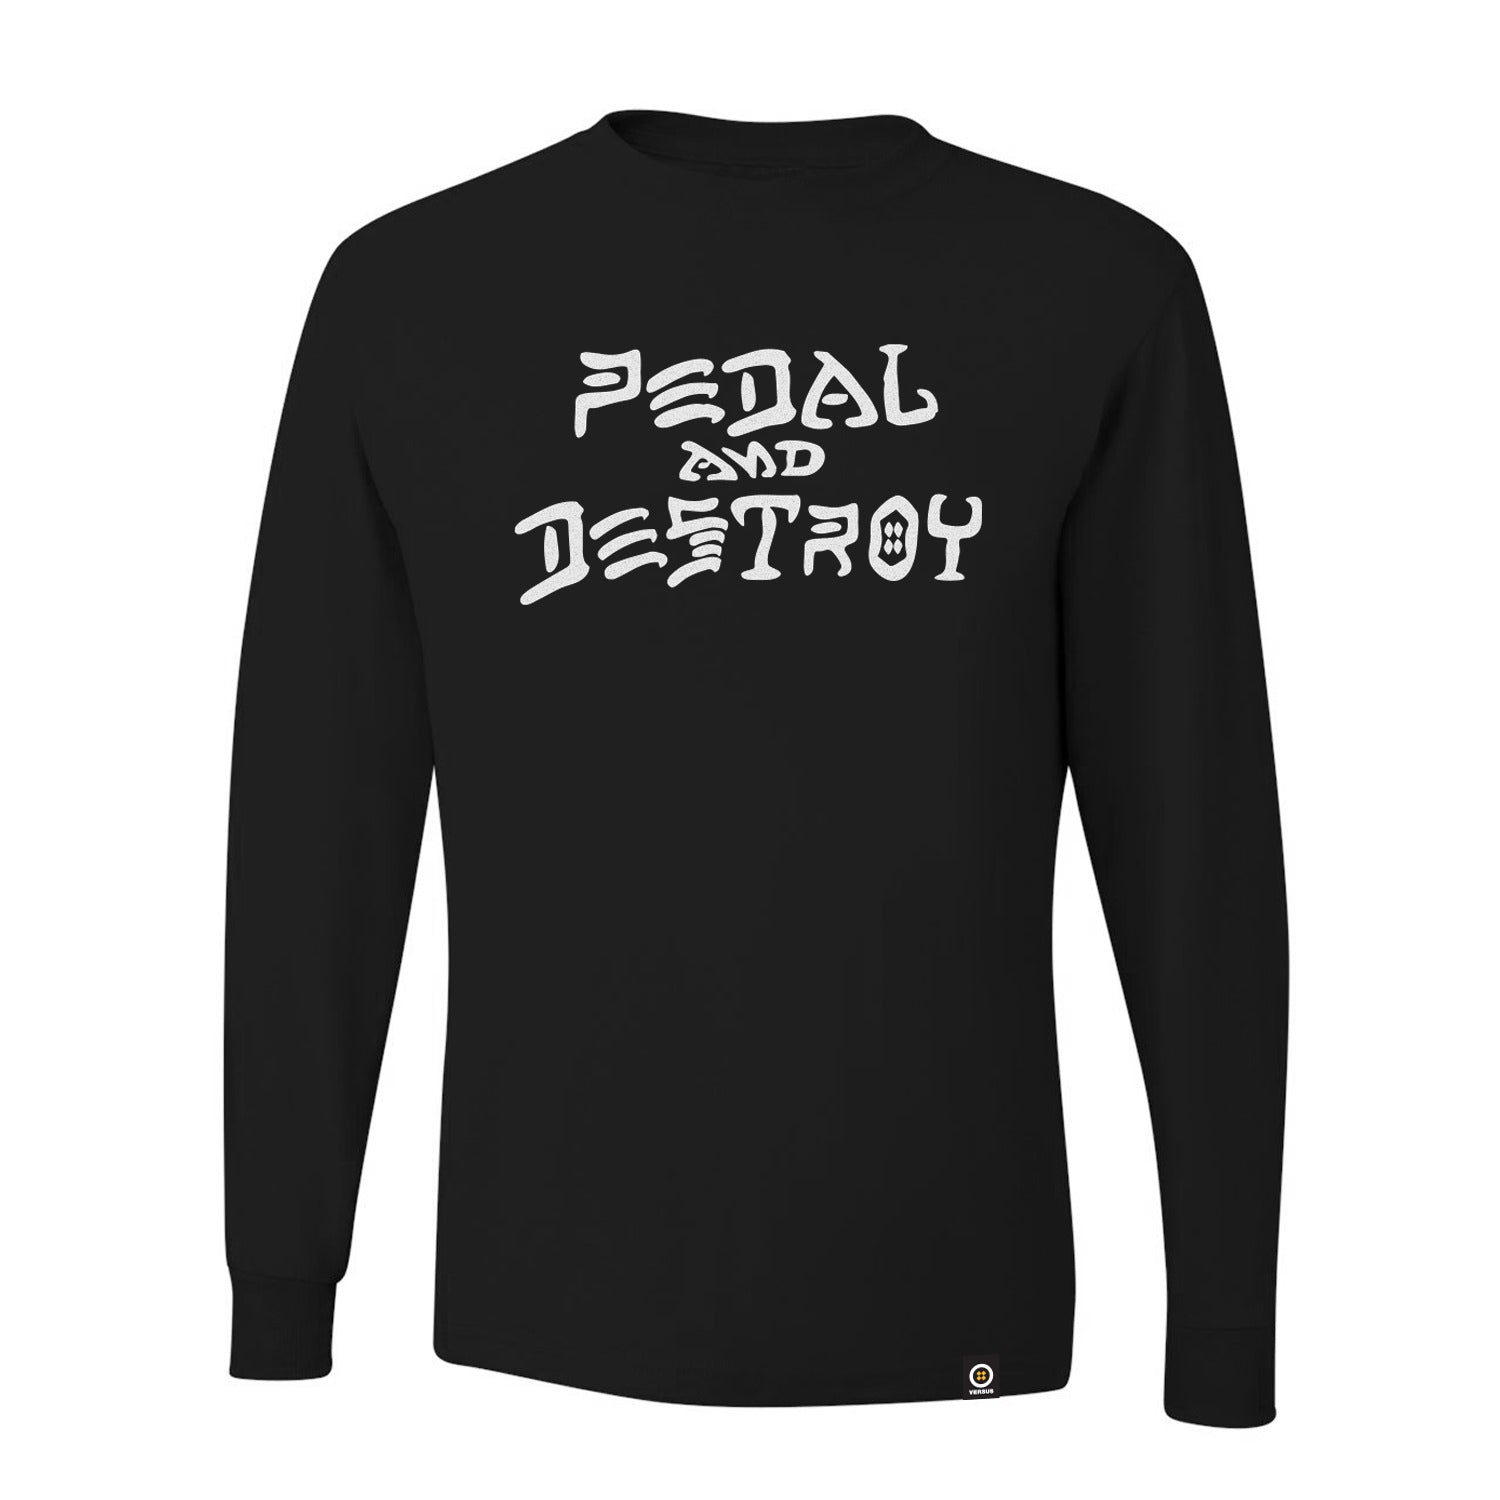 Versus Tires Pedal and Destroy long sleeve t shirt